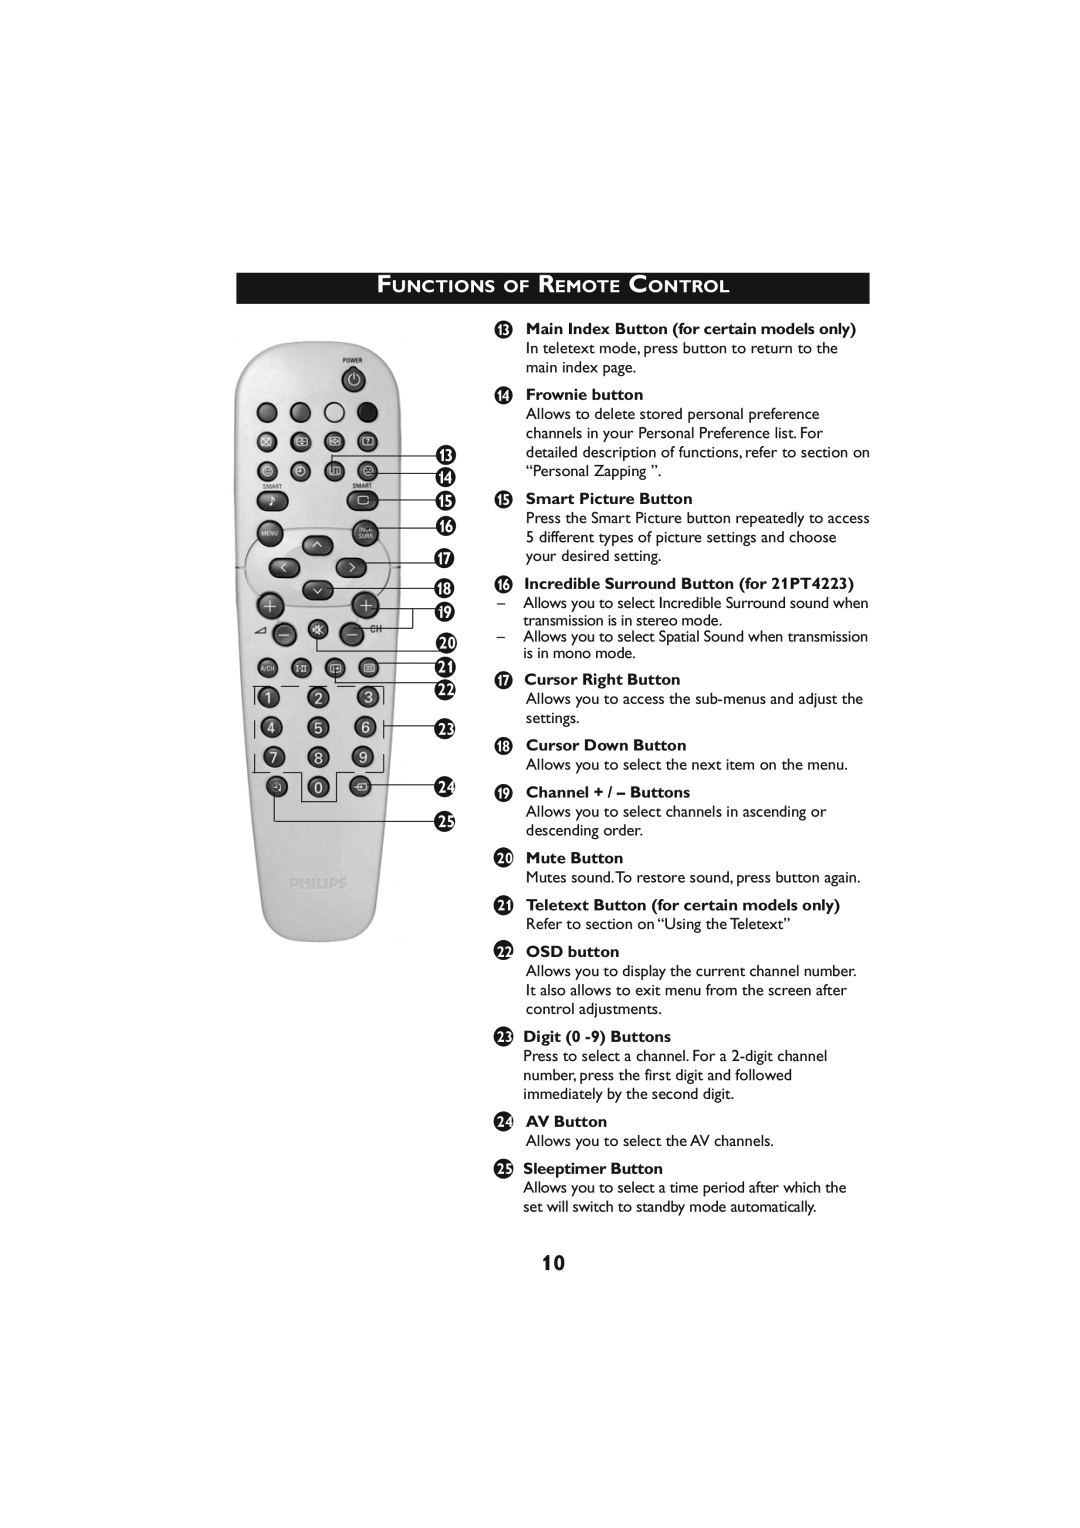 Philips Frownie button, Smart Picture Button, Incredible Surround Button for 21PT4223, Cursor Right Button, Mute Button 